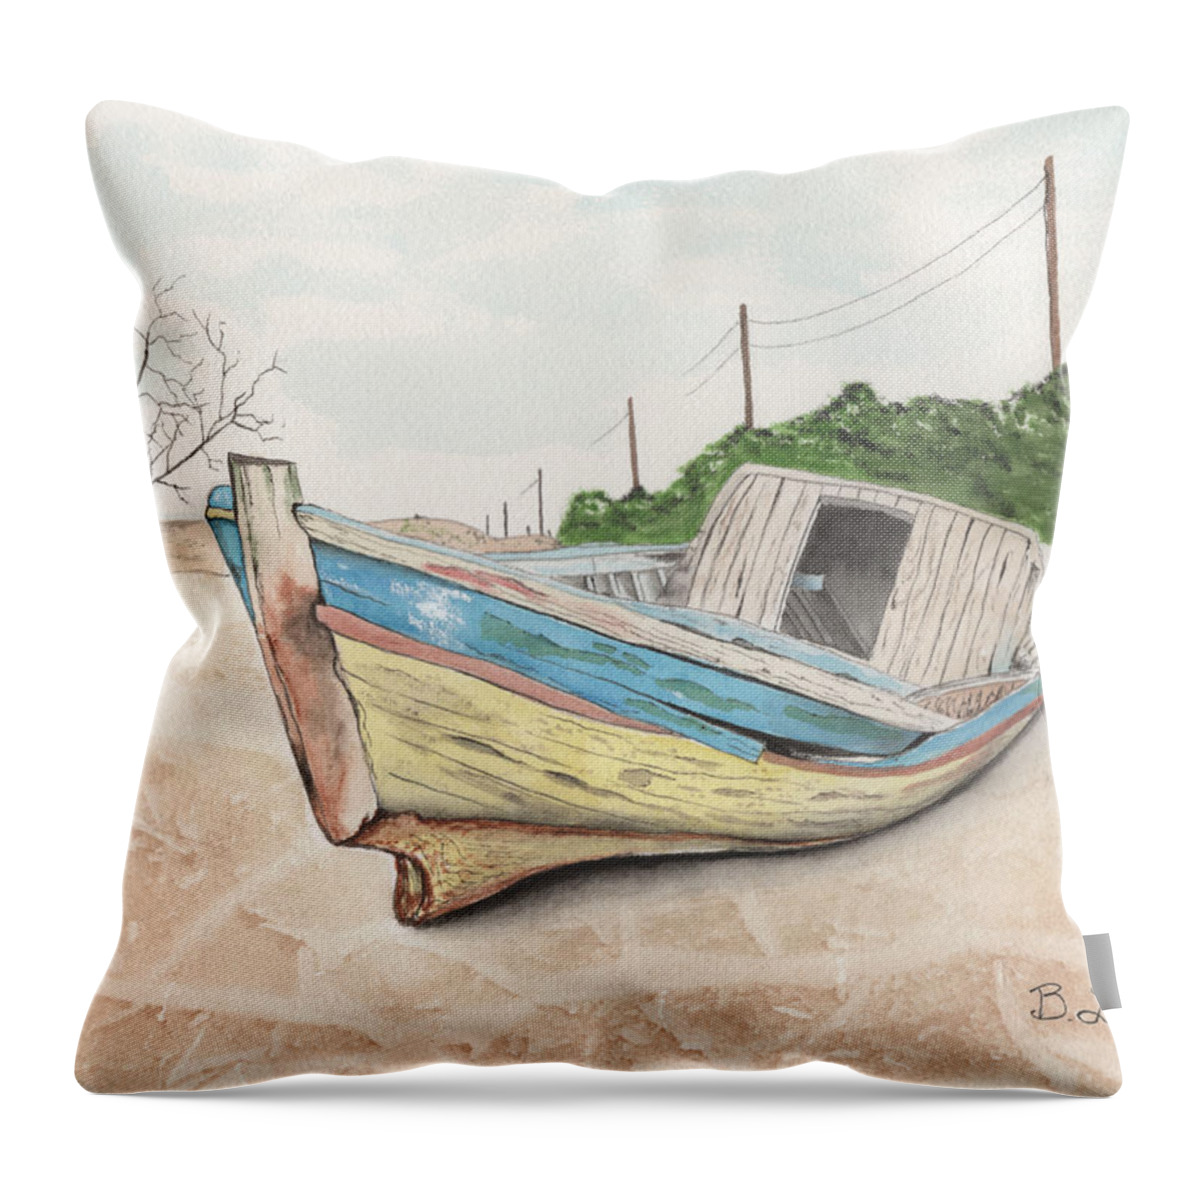 Watercolor Throw Pillow featuring the painting Beached by Bob Labno